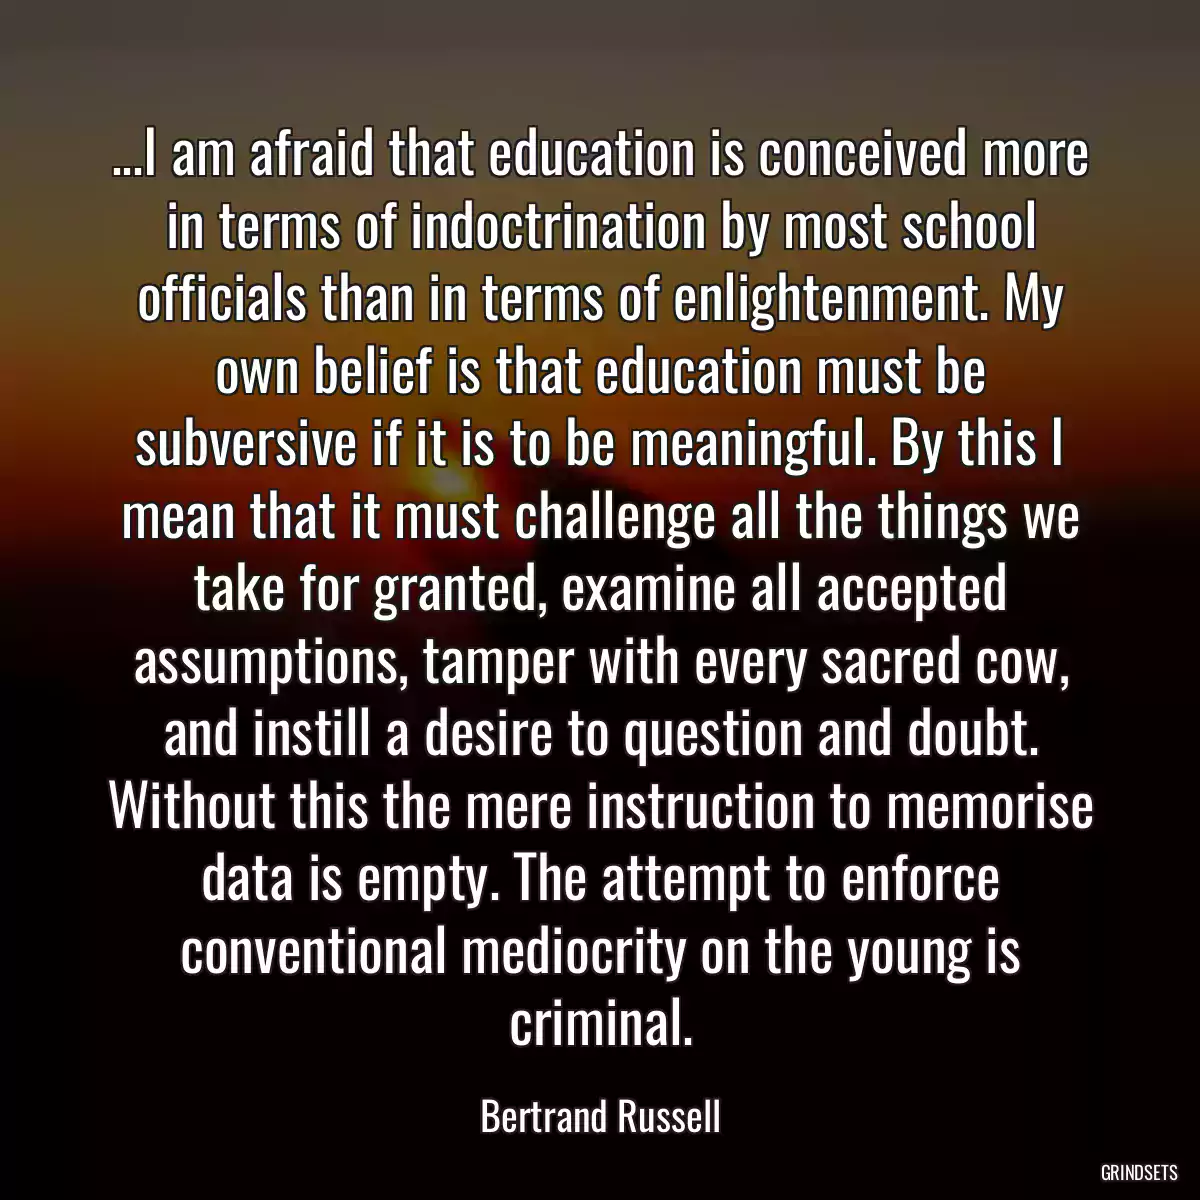 ...I am afraid that education is conceived more in terms of indoctrination by most school officials than in terms of enlightenment. My own belief is that education must be subversive if it is to be meaningful. By this I mean that it must challenge all the things we take for granted, examine all accepted assumptions, tamper with every sacred cow, and instill a desire to question and doubt. Without this the mere instruction to memorise data is empty. The attempt to enforce conventional mediocrity on the young is criminal.